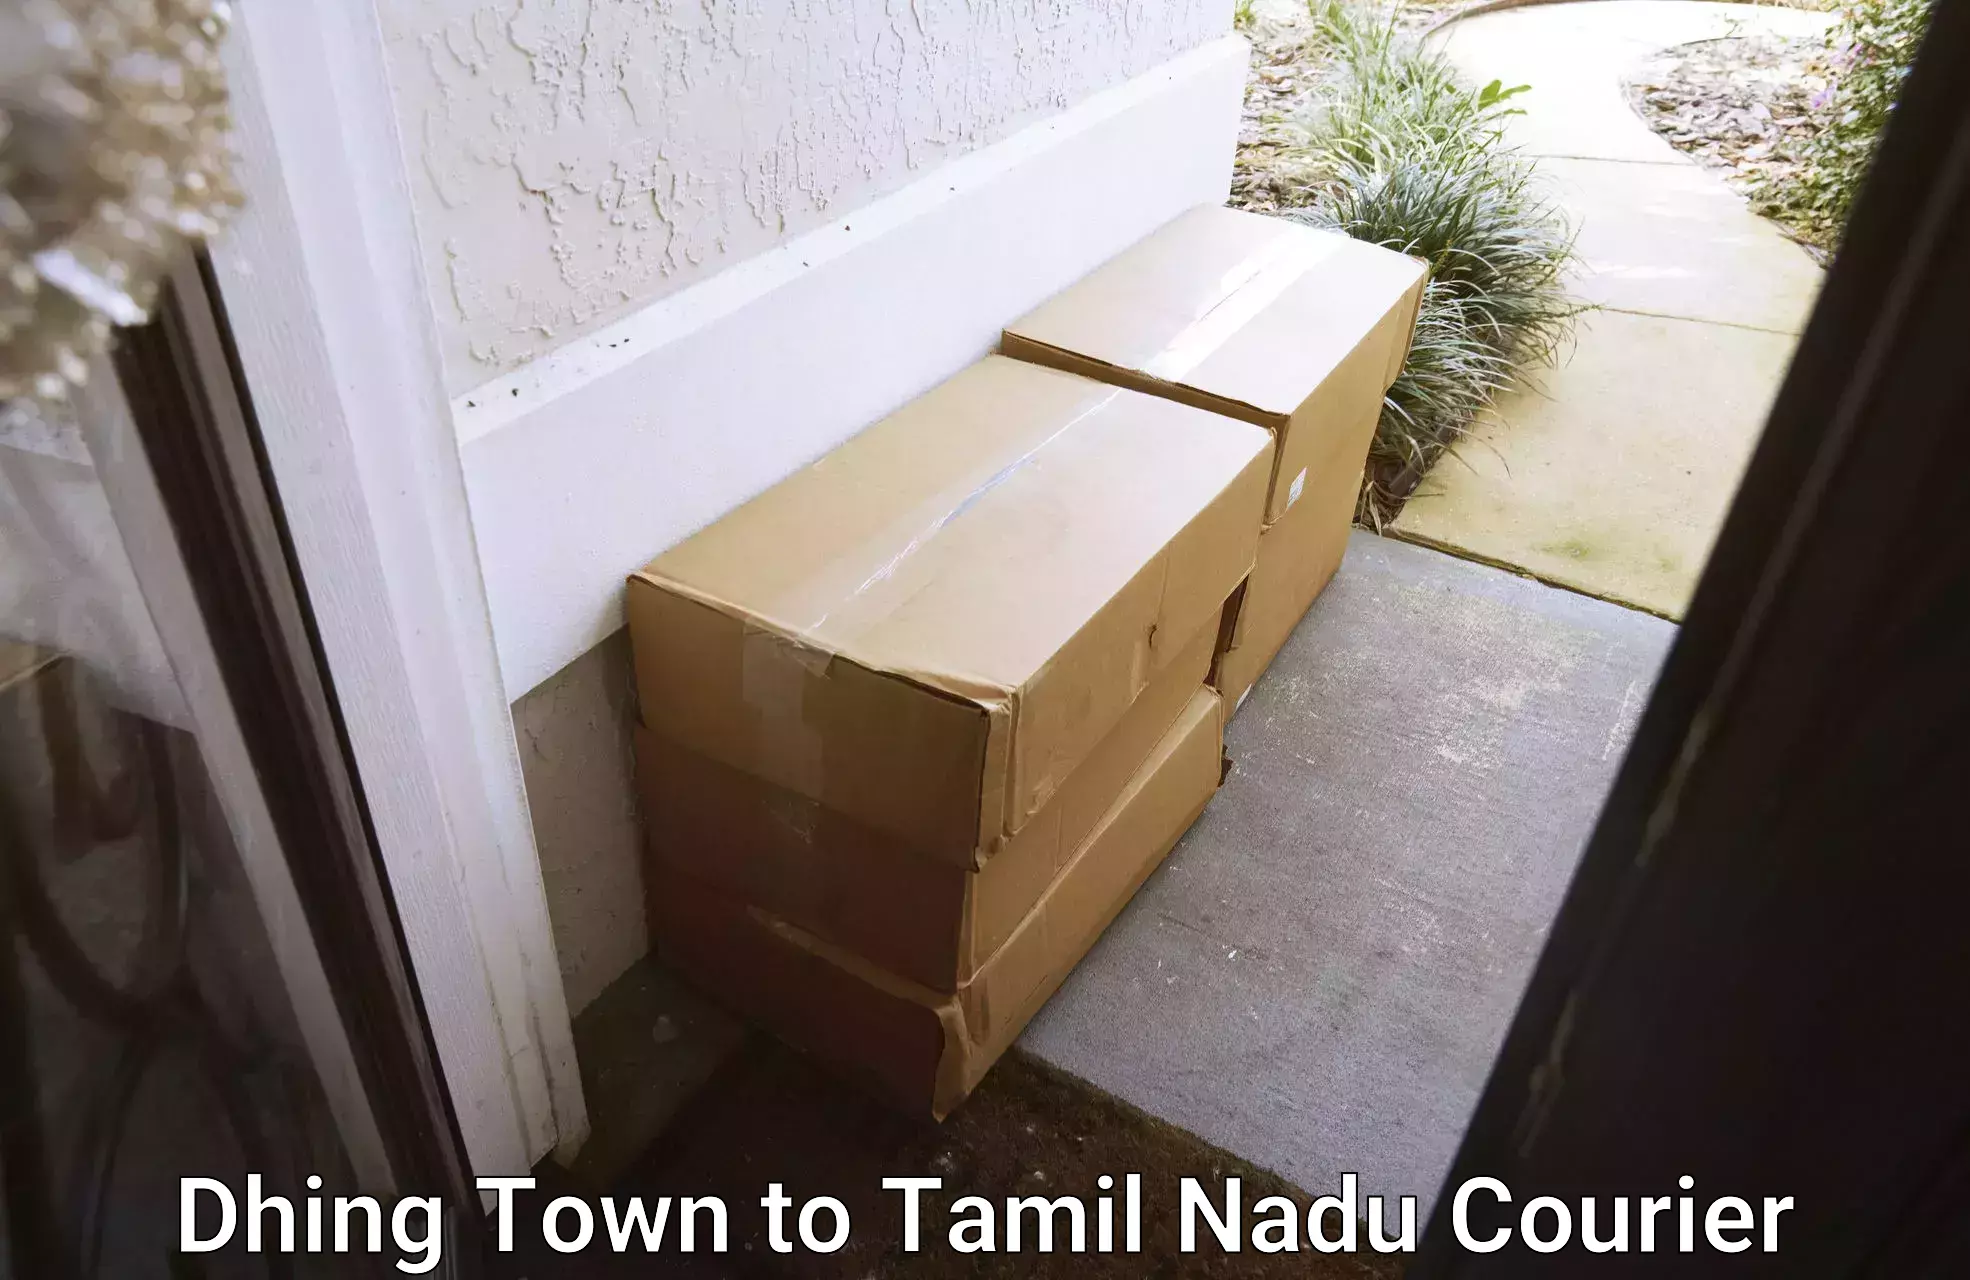 Sustainable delivery practices in Dhing Town to Tamil Nadu